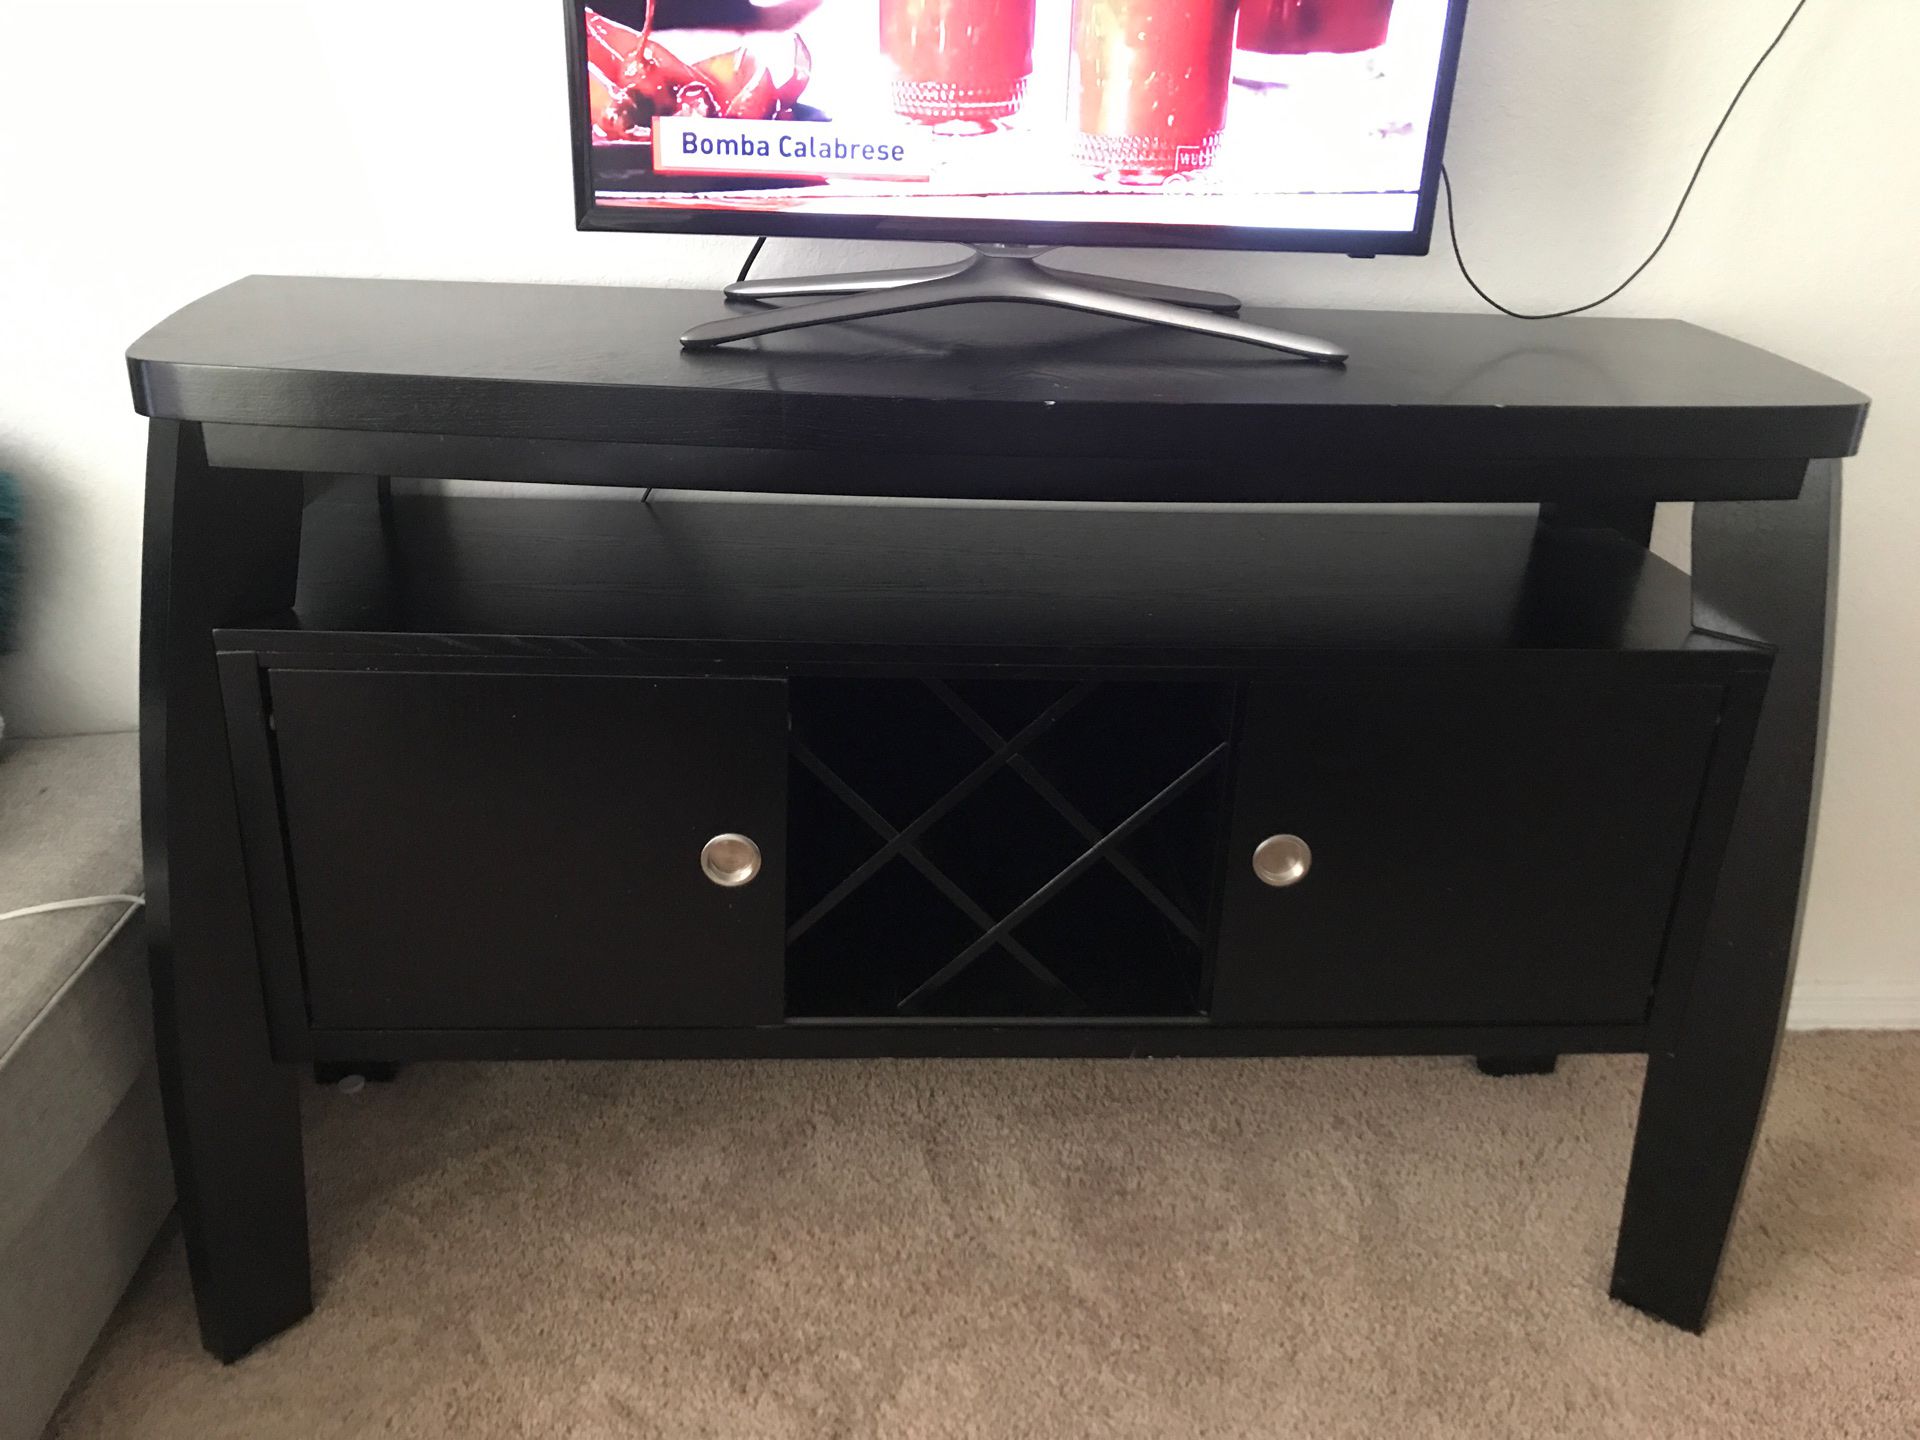 Unique wine rack/TV stand with sliding drawers